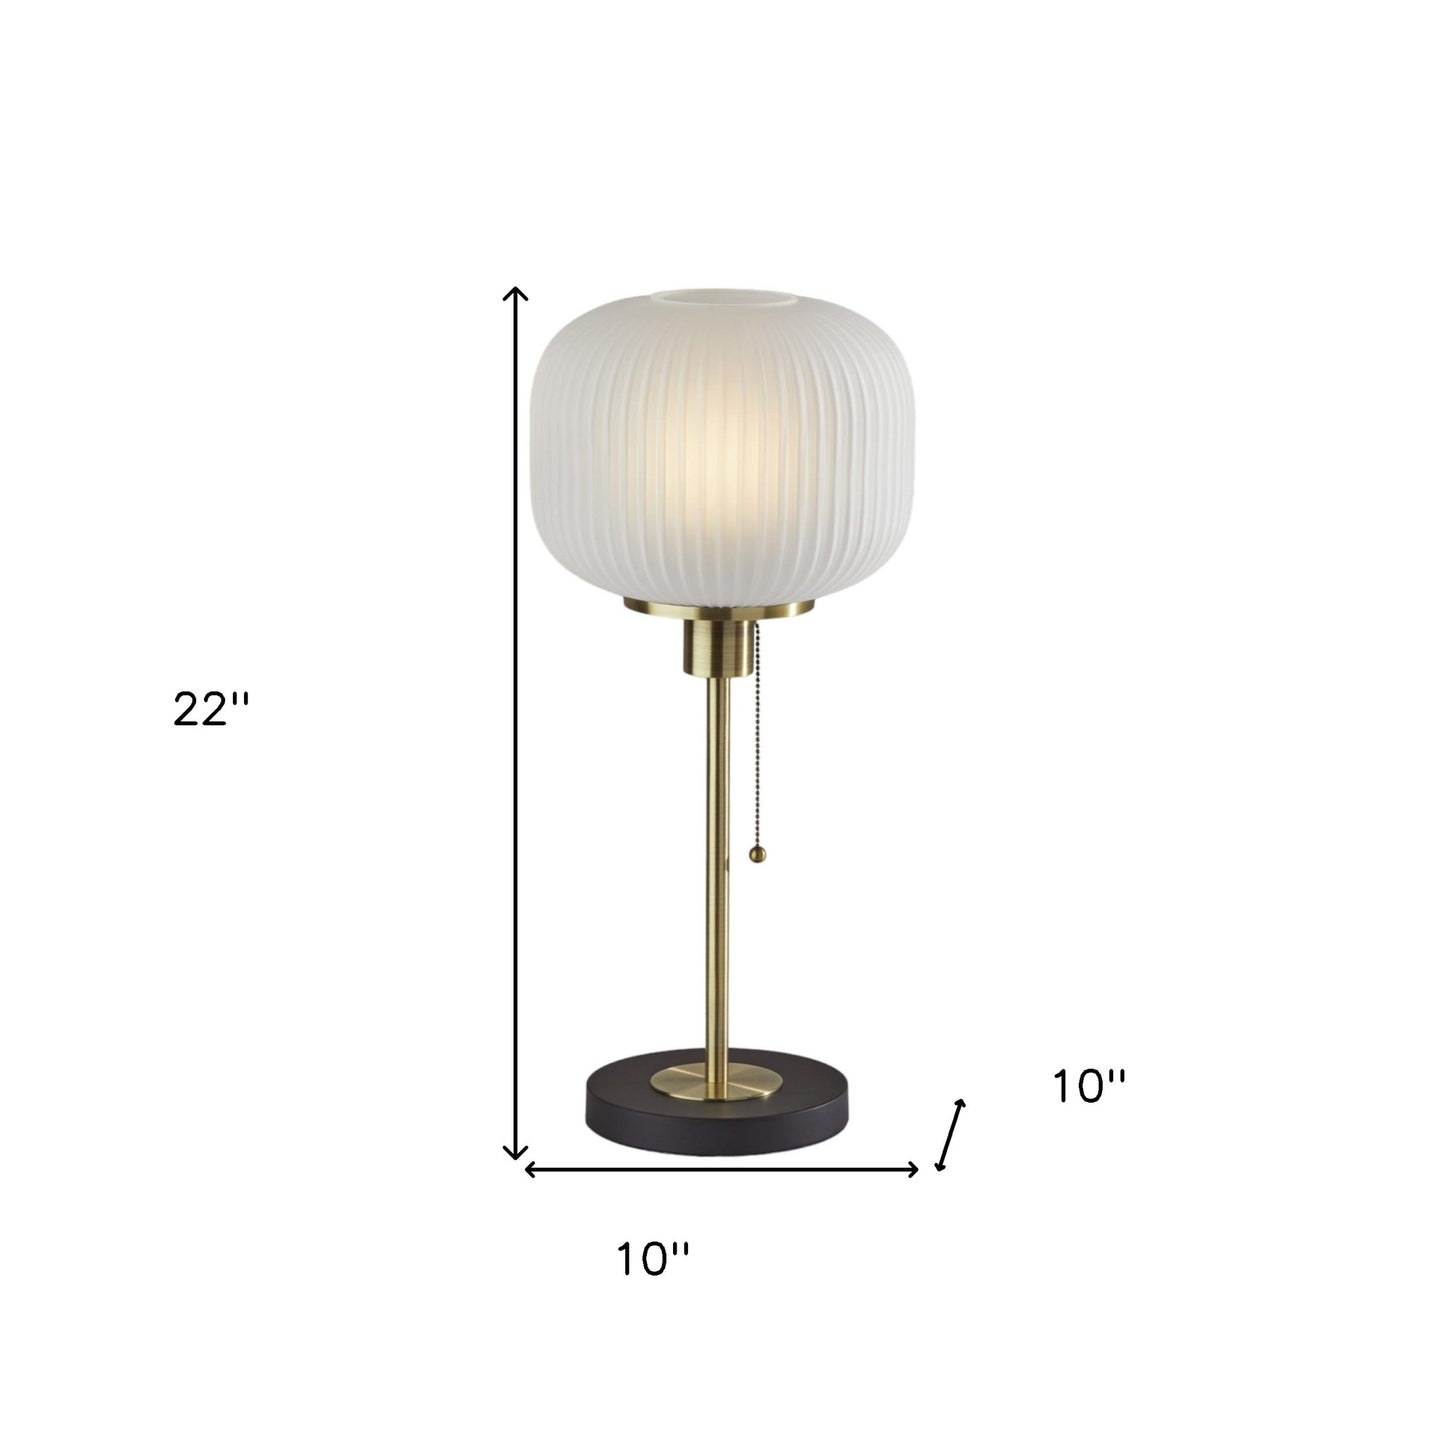 22" Antiqued Brass Table Lamp With White Ribbed Frosted Glass Dome Shade